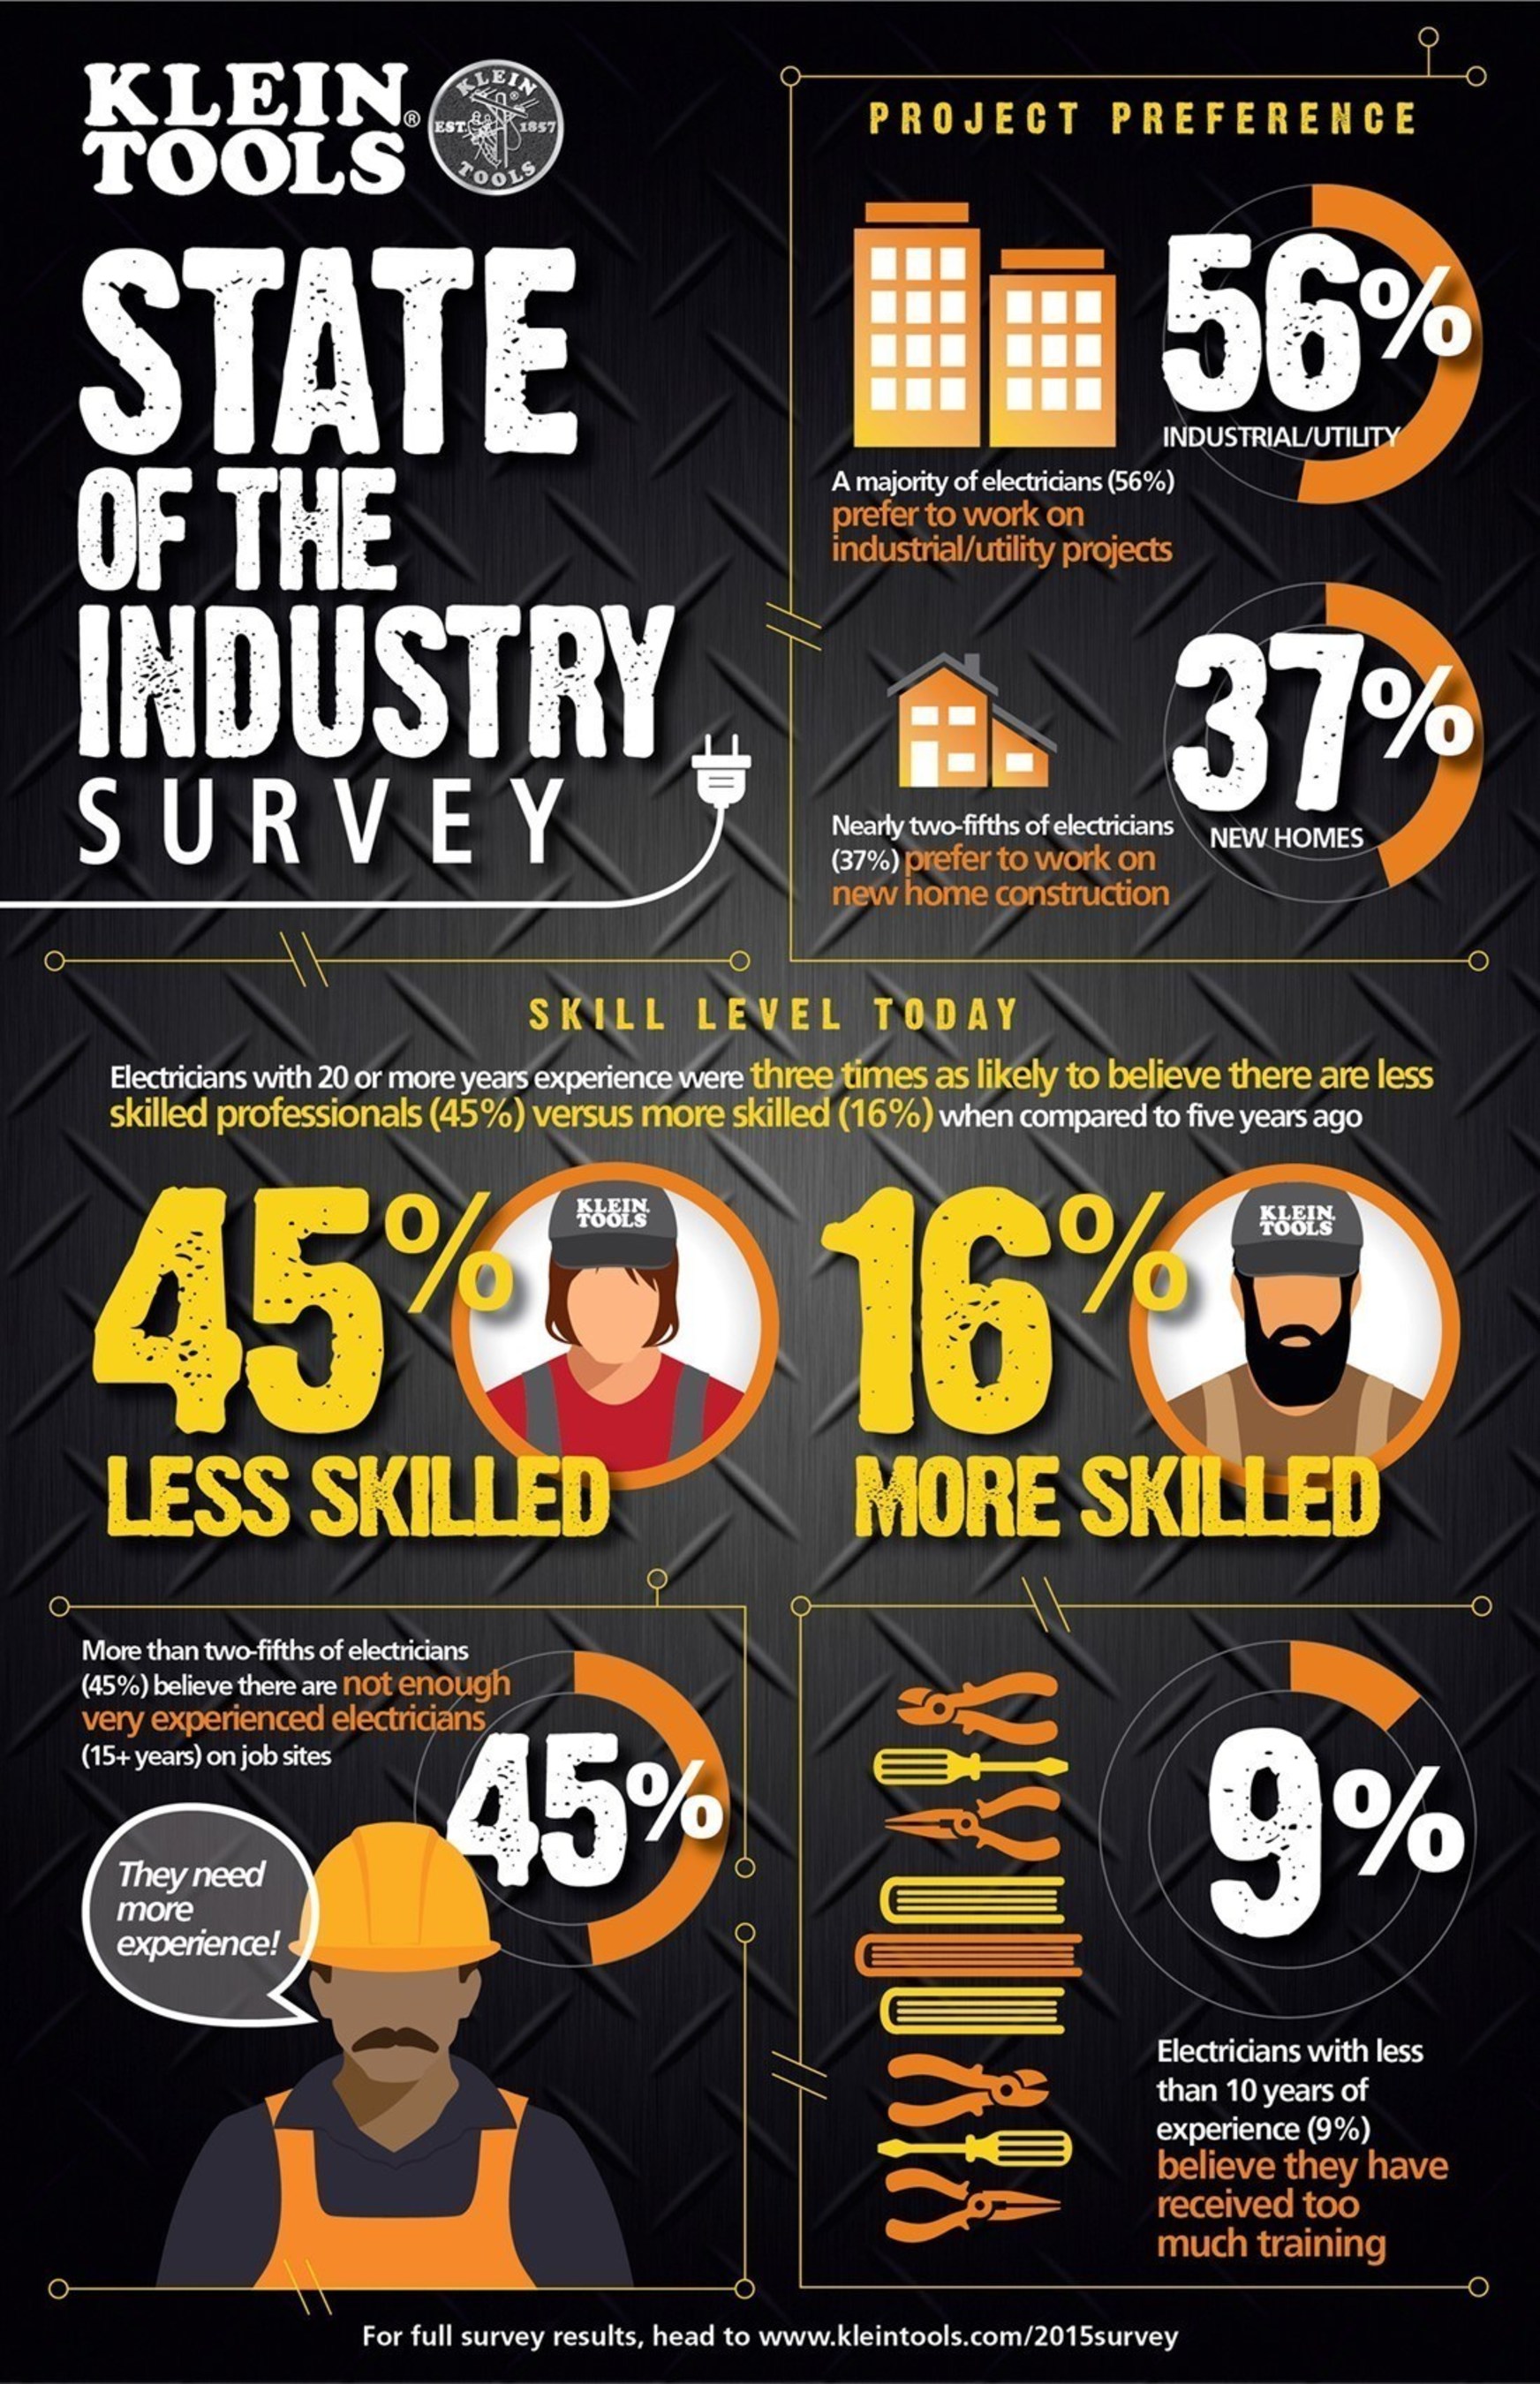 Klein Tools State of the Industry Survey finds that electricians are concerned about lack of experience on the job and the ability to fill empty, entry-level jobs.  More than three-quarters of electricians (75%) believe there are not enough experienced electricians on job sites. They also disagree on the amount of training required to be on a job site. A majority of electricians (55%) believe 1,000 or more hours of training is necessary to becoming an effective electrician. However, more than one-half of electricians with less than 10 years of experience (55%) believe less than 250 hours of training are necessary.